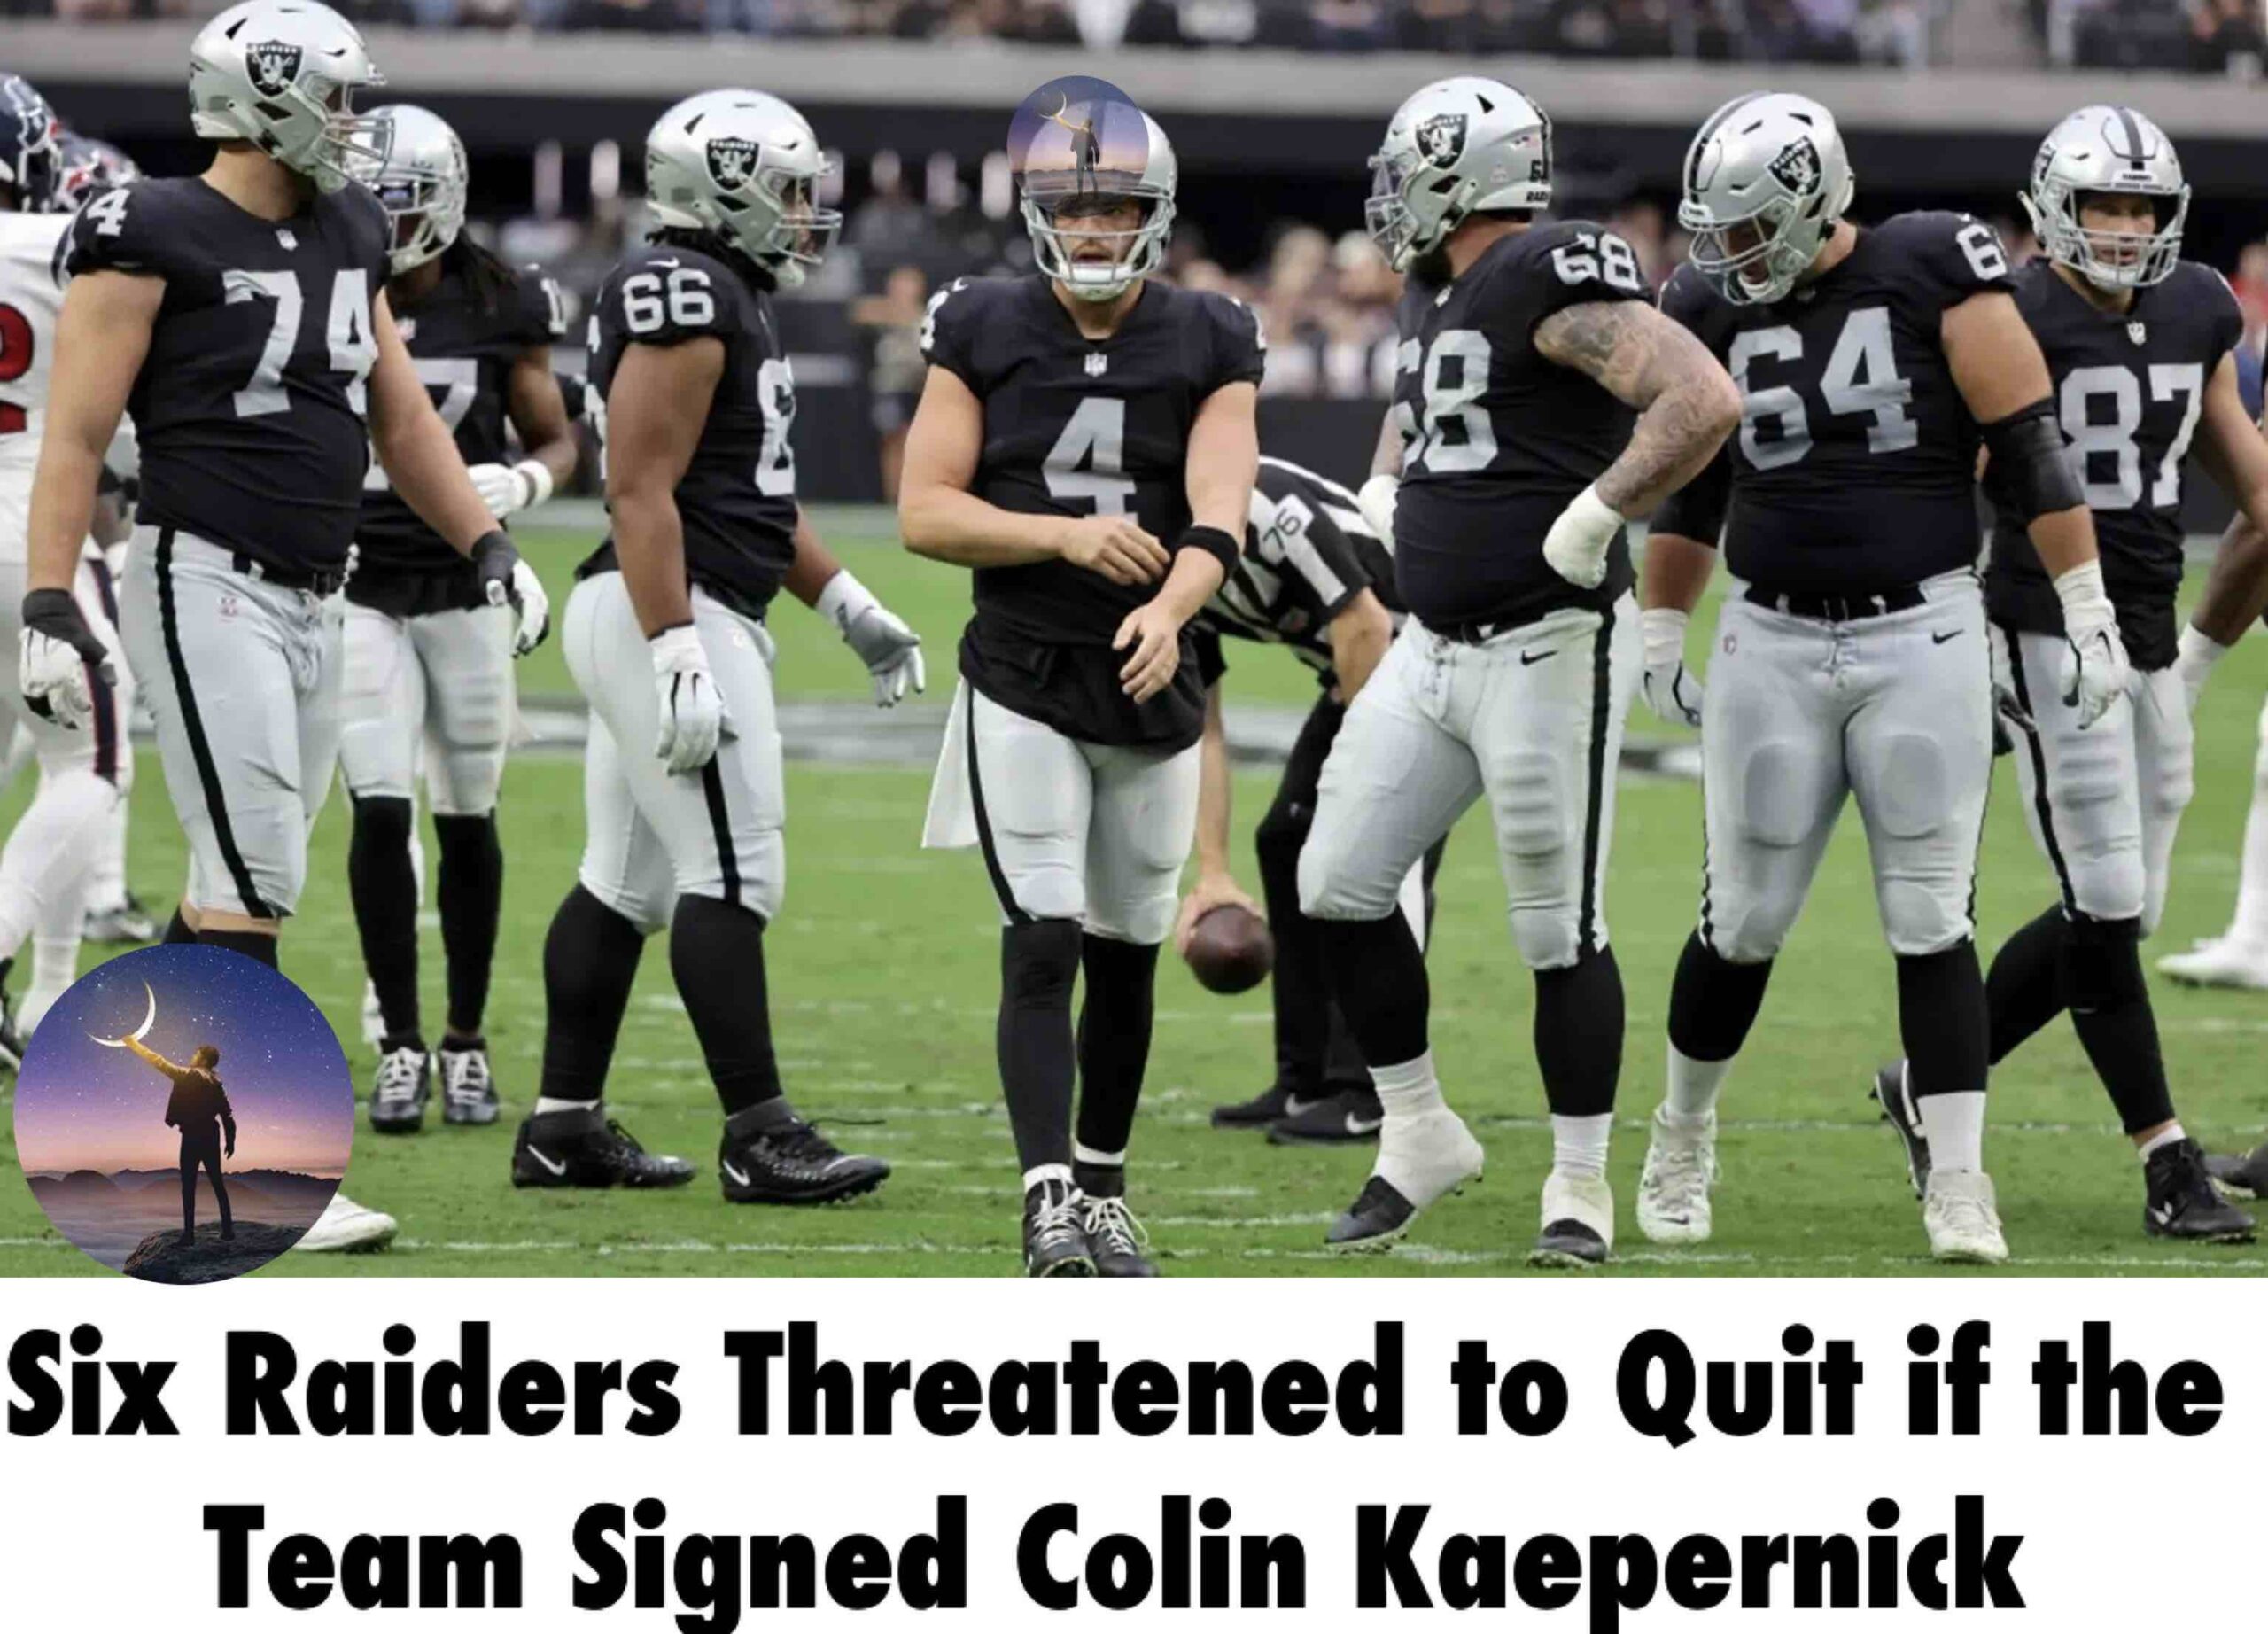 Just in: Six Raiders Threatened to Quit if the Team Signed Colin Kaepernick